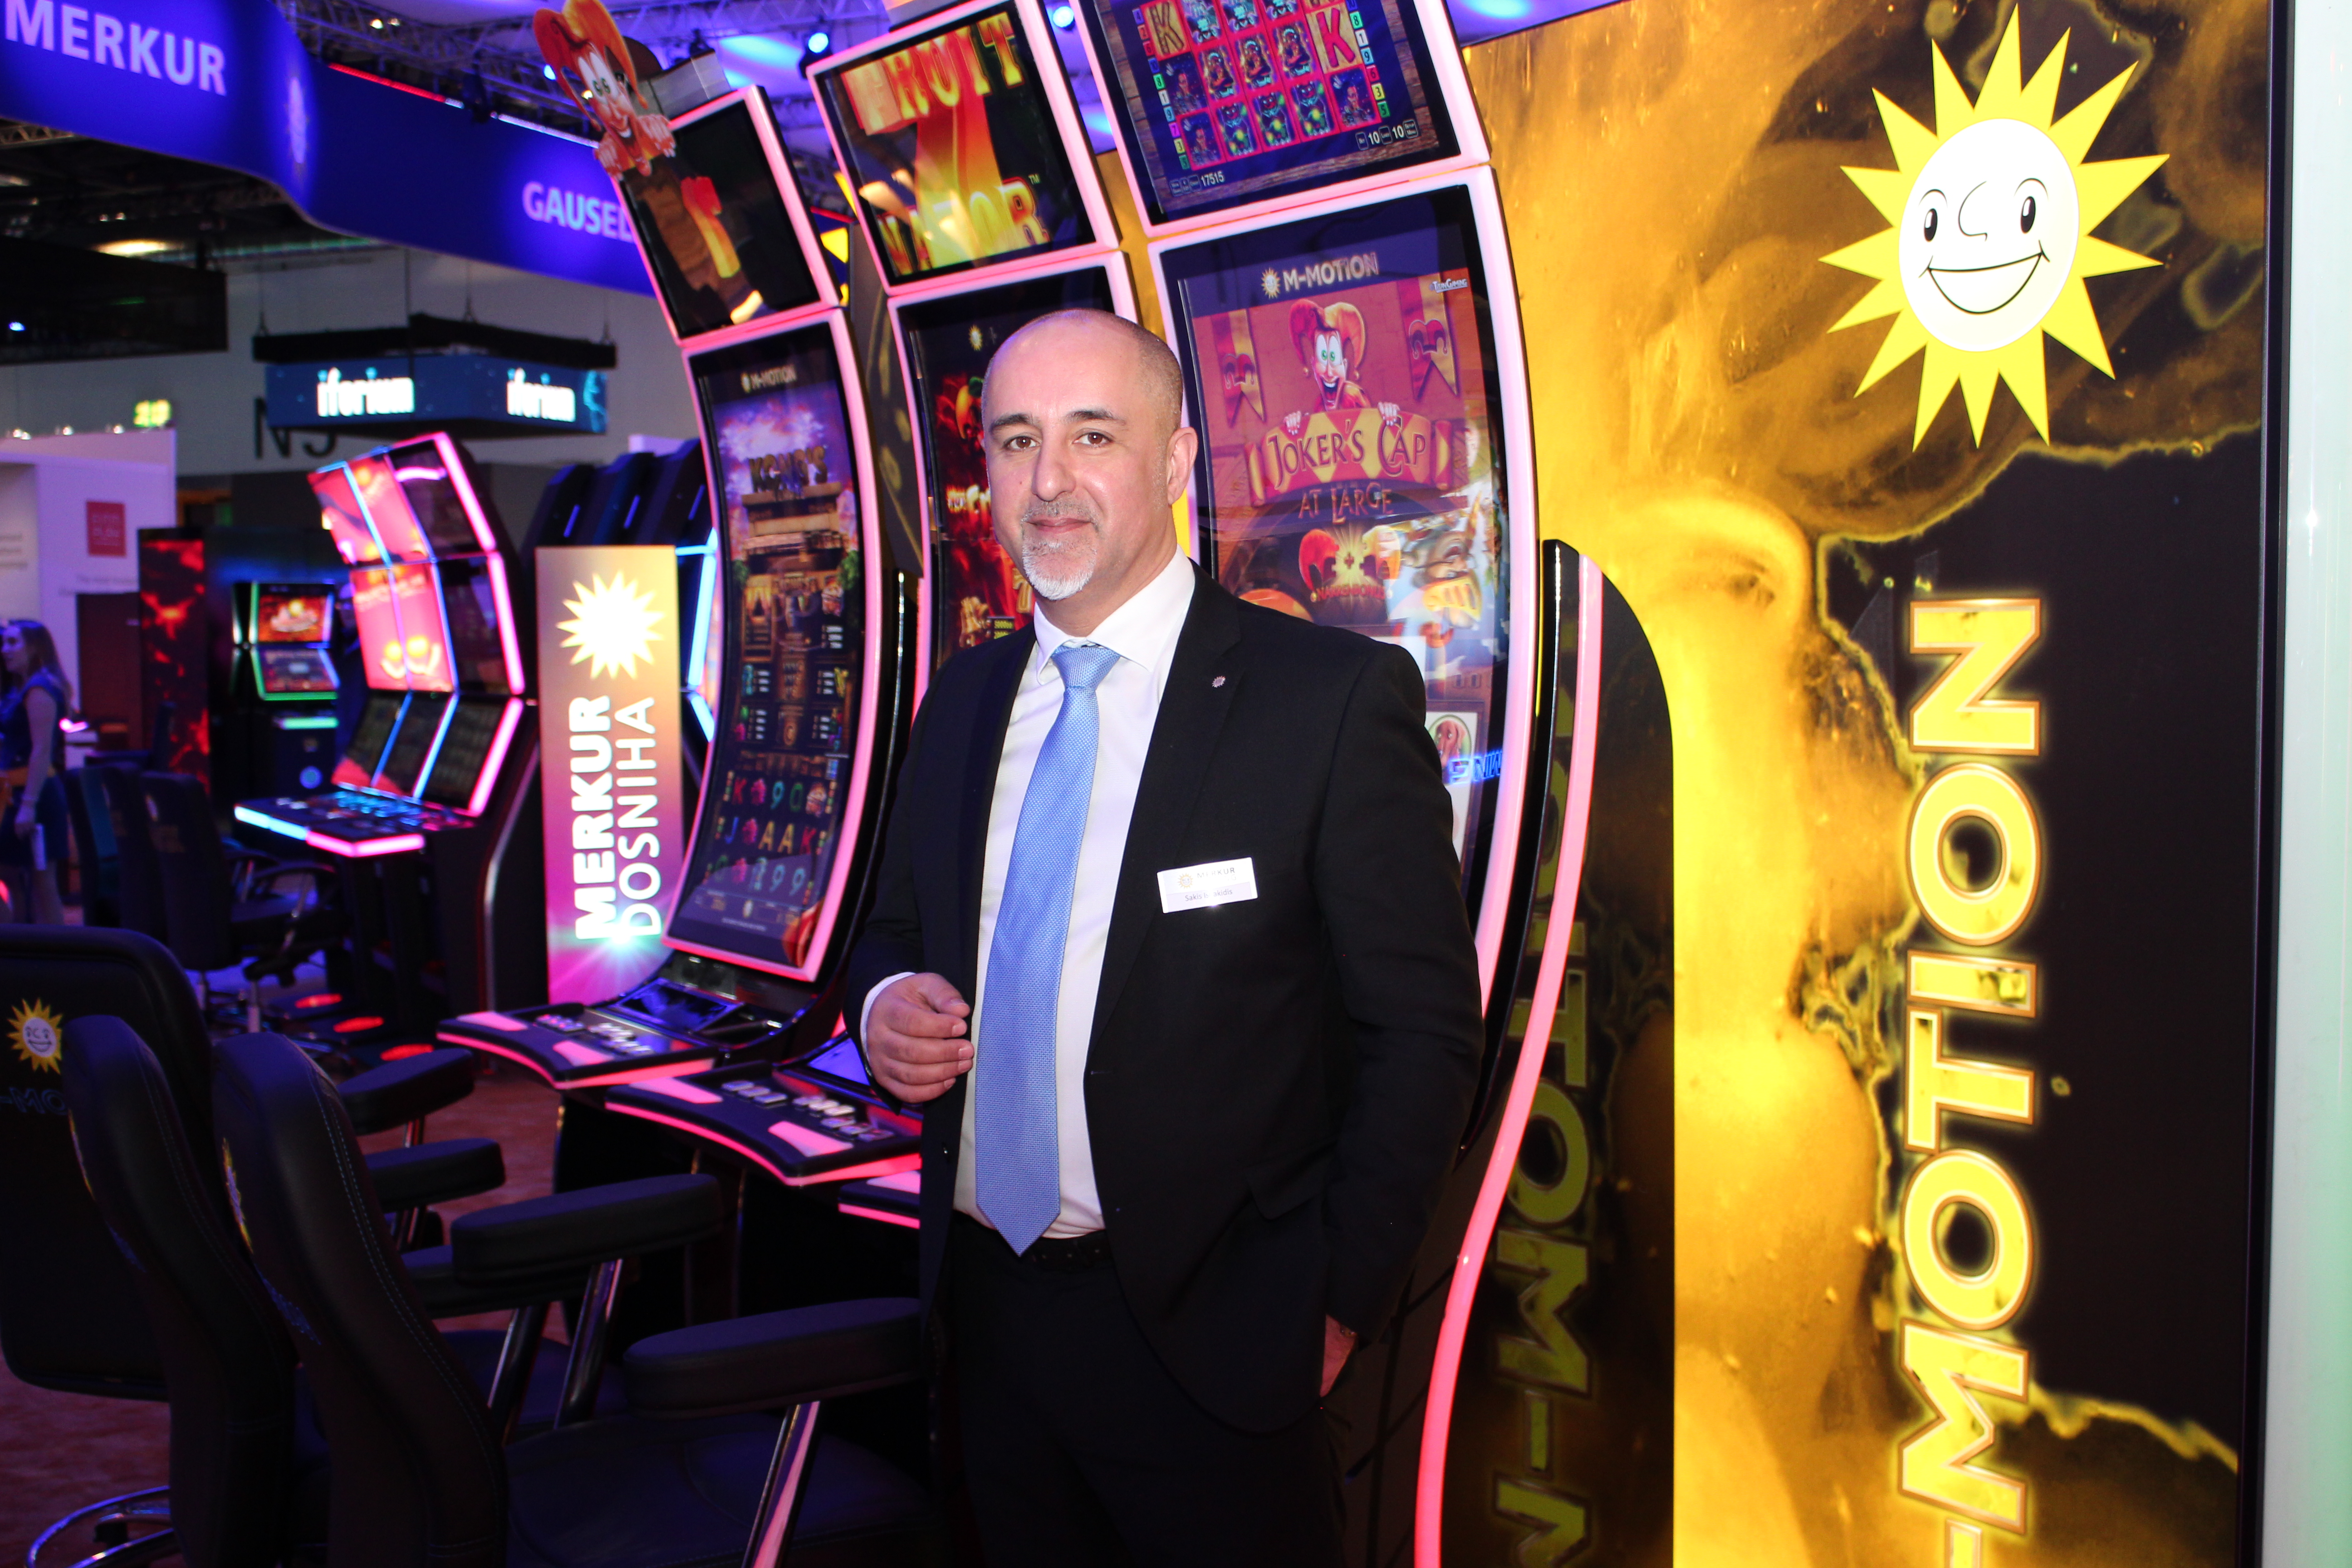 New cabinets dominate for Merkur Gaming